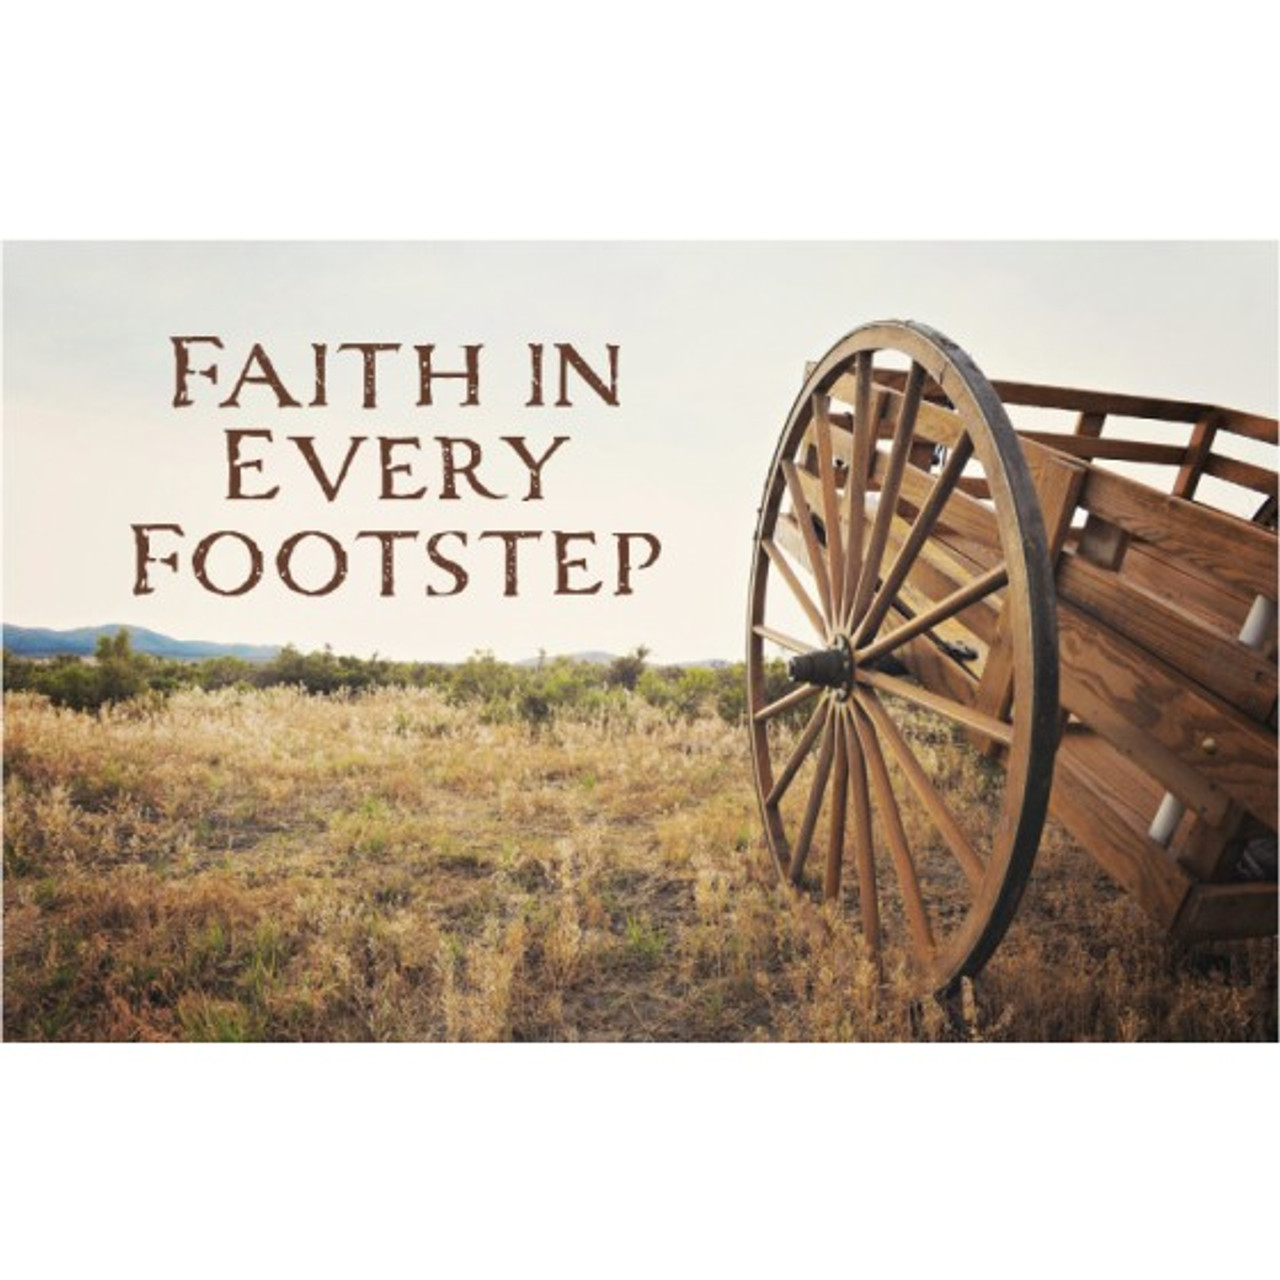 Faith in Every Footstep - Trek Recommend holder  *